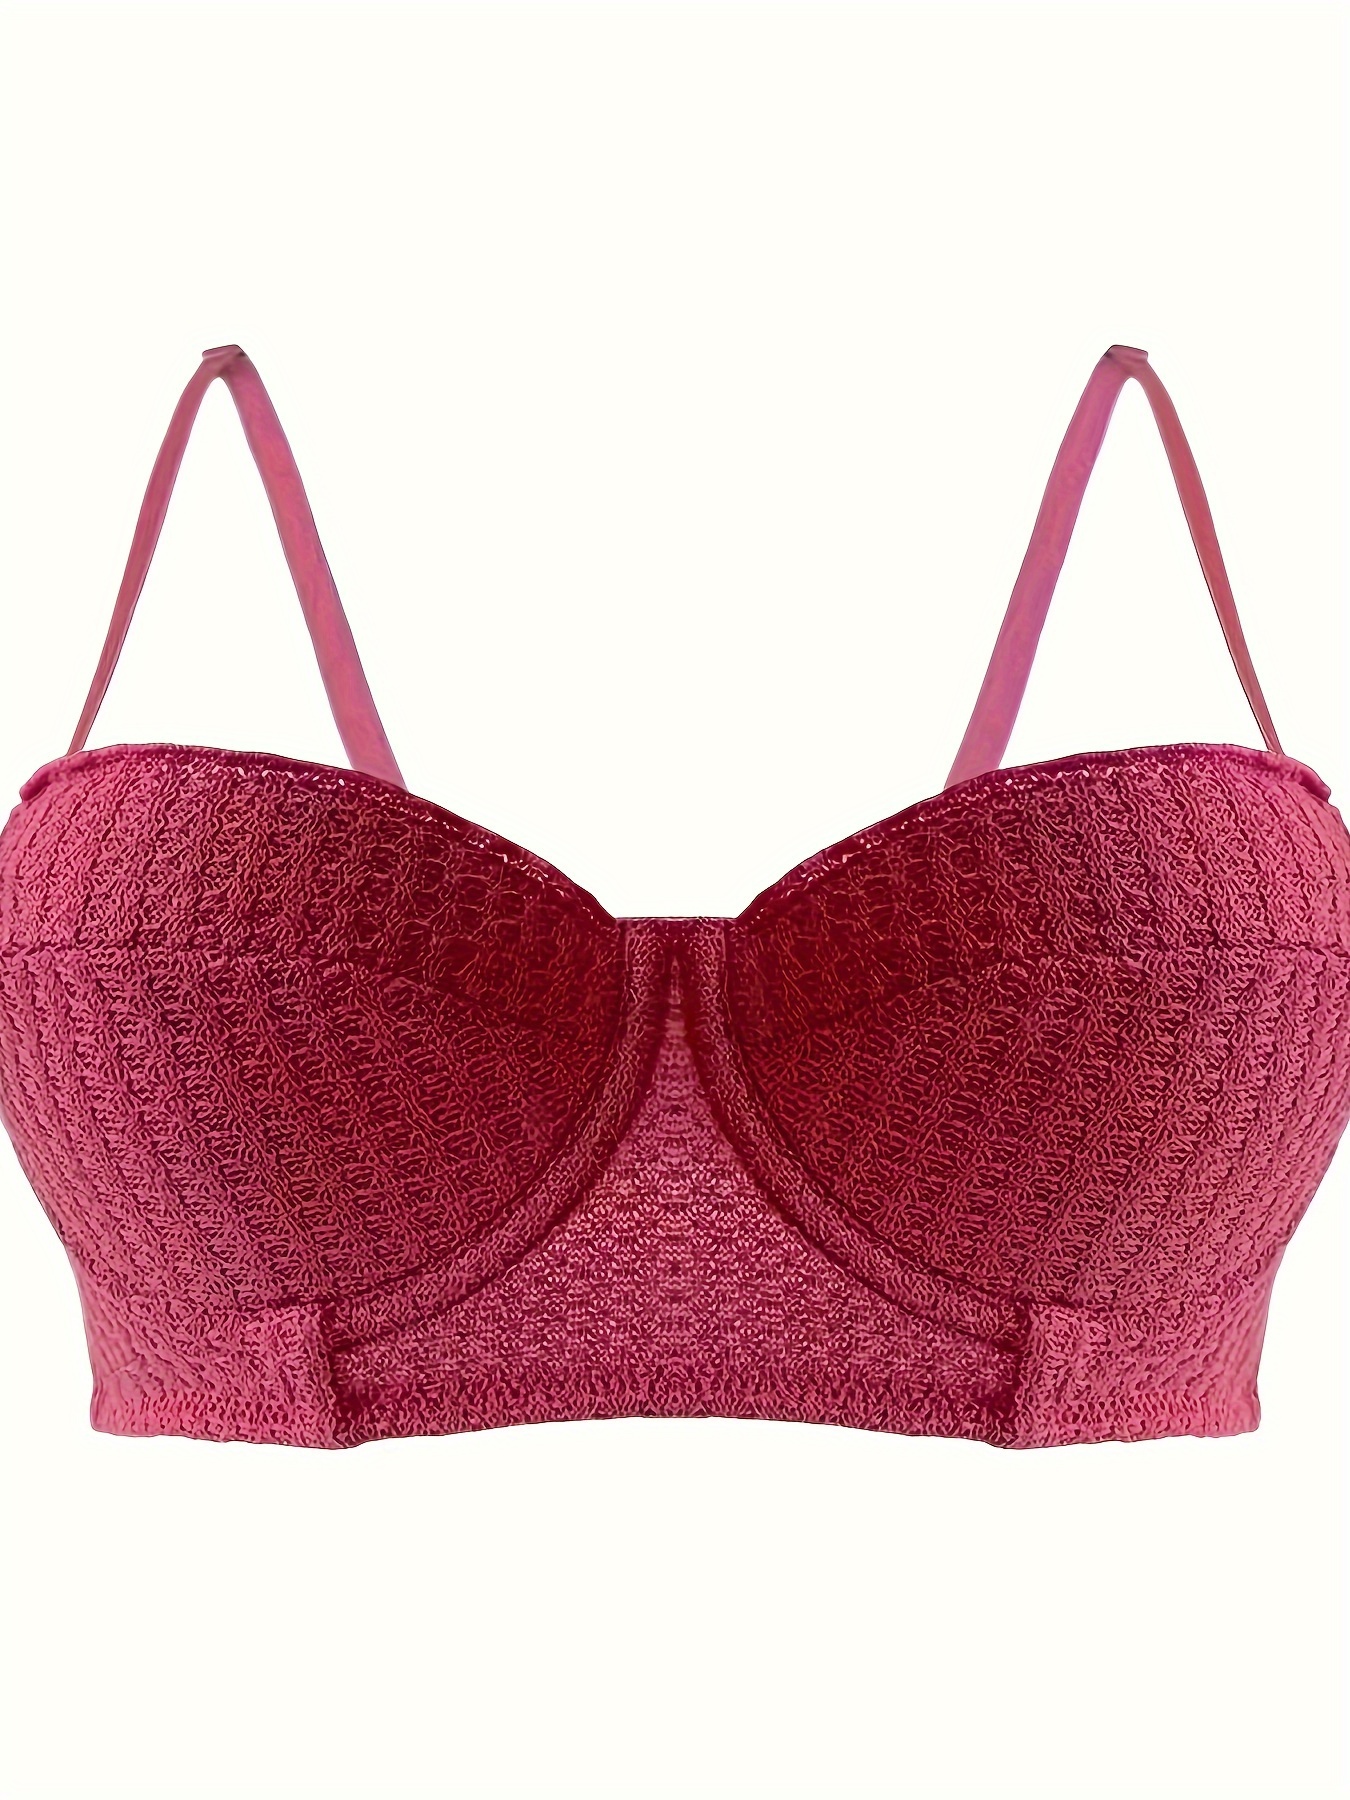 Solid Push Up Bra, Comfy & Breathable Everyday Intimates Bra, Women's  Lingerie & Underwear